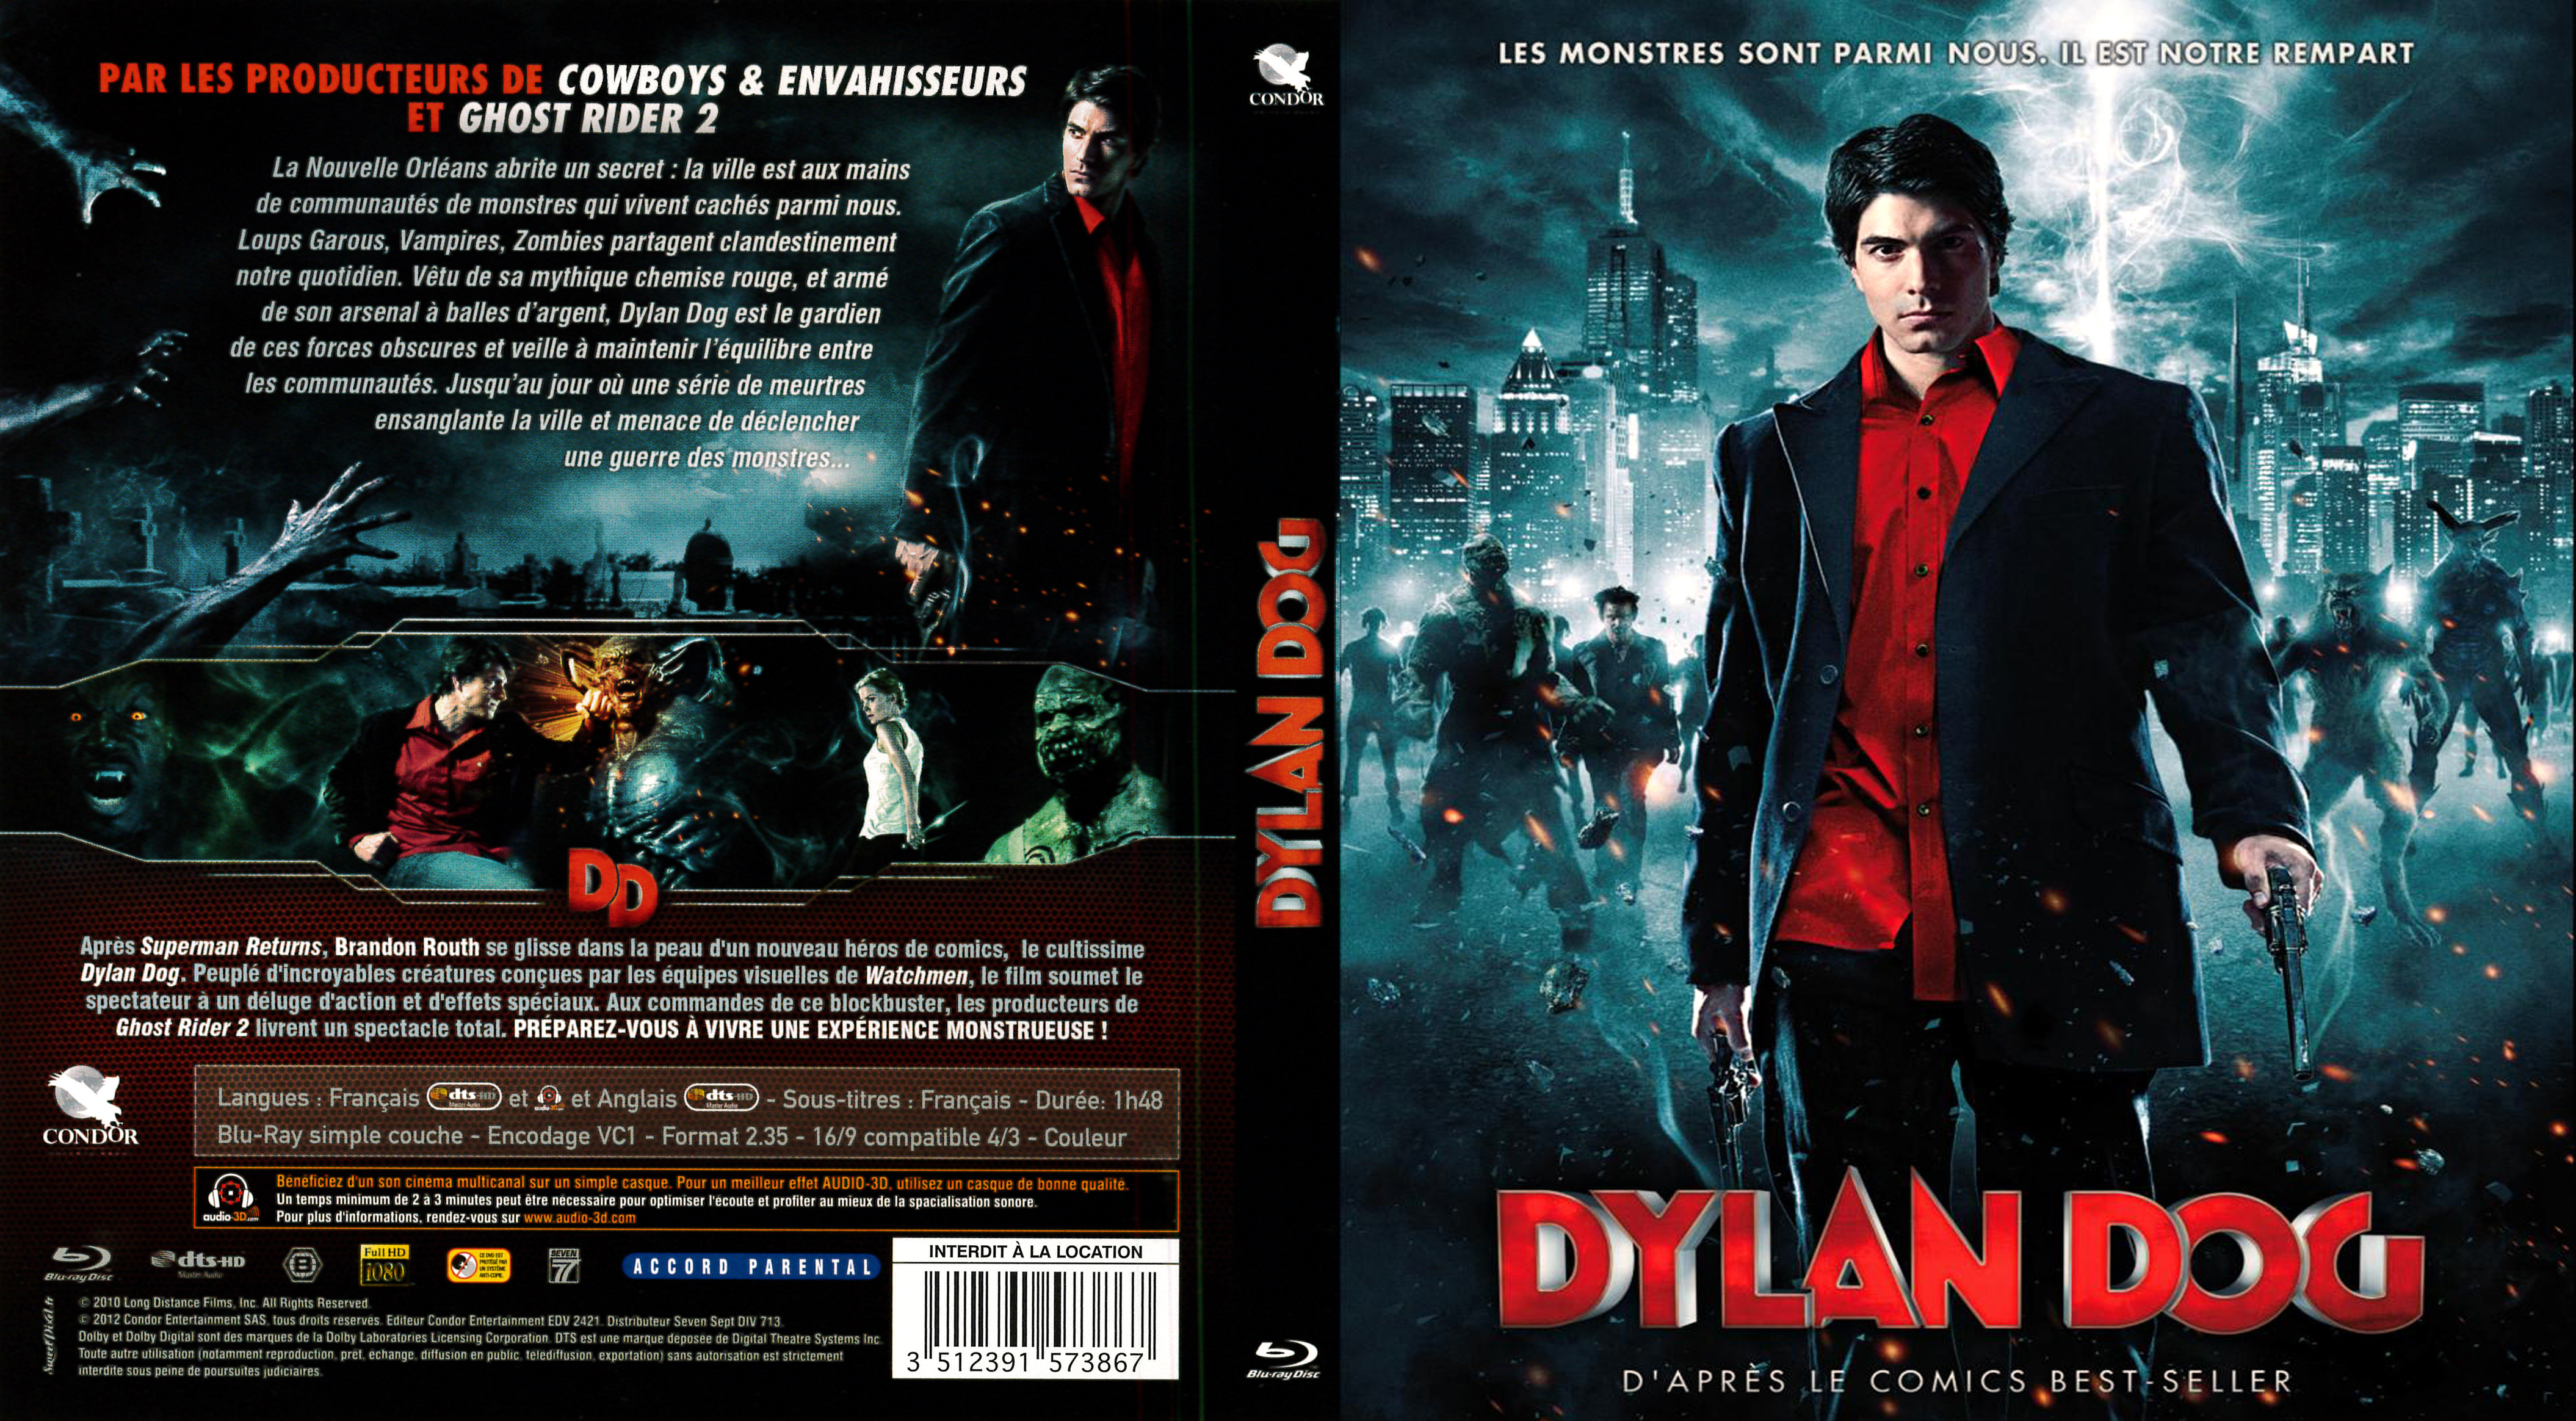 Jaquette DVD Dylan dog (BLU-RAY)